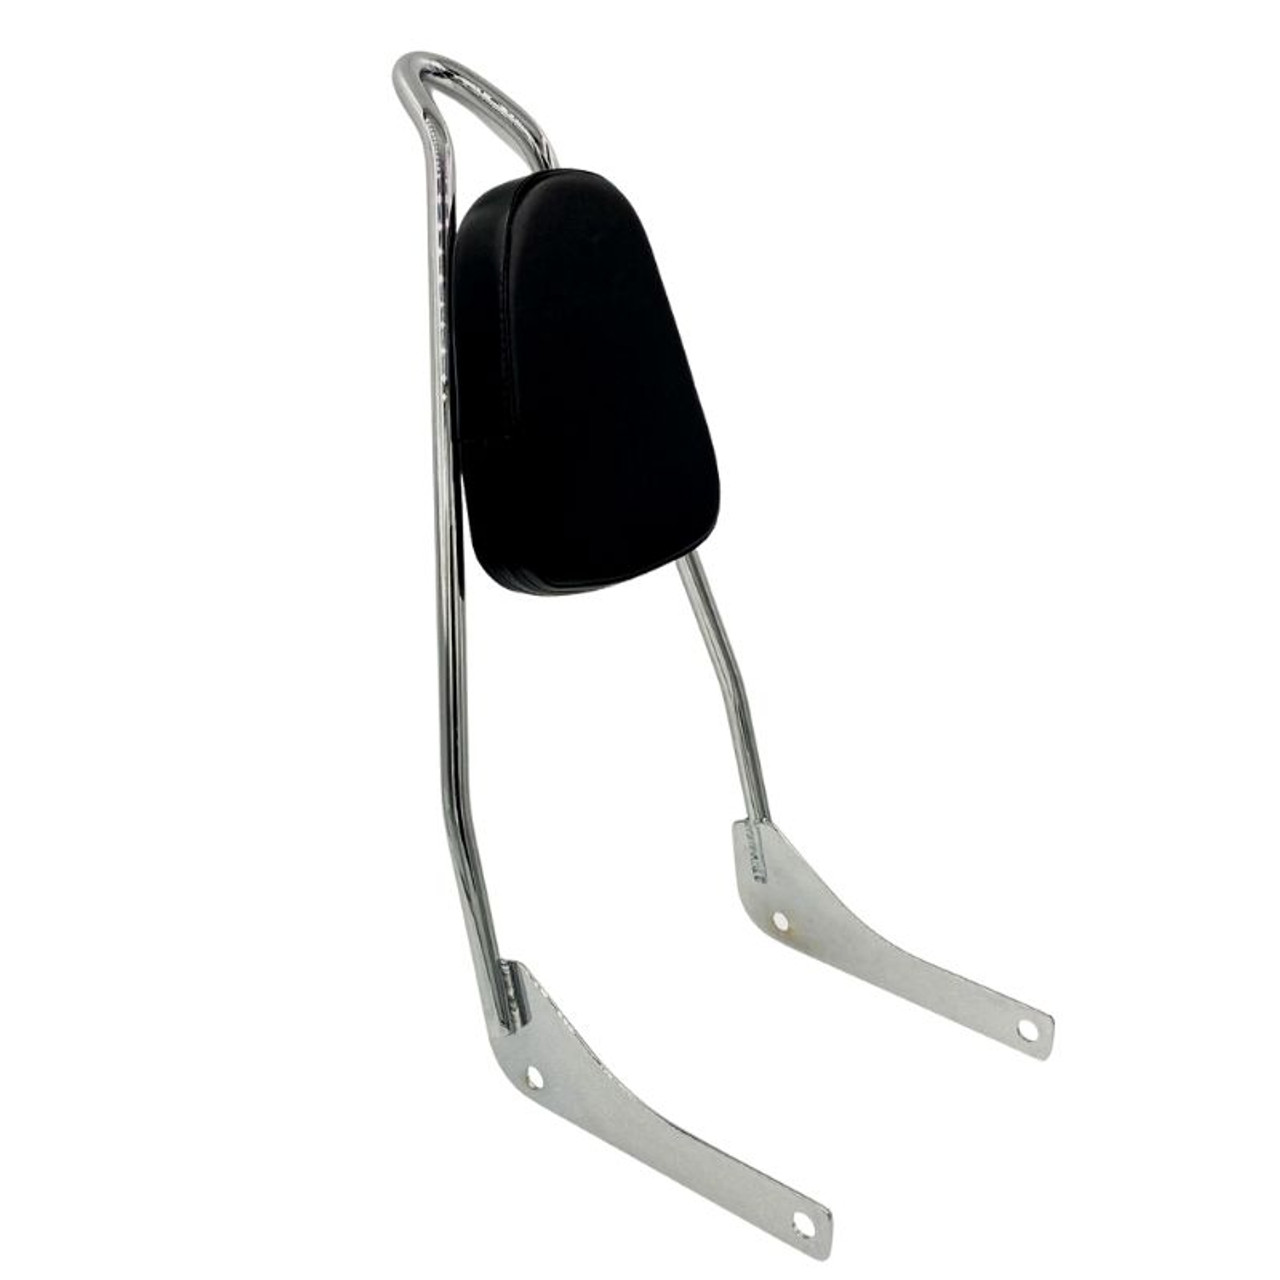 2018+ Sport Glide and Low Rider Punisher Sissy Bar with pad -18